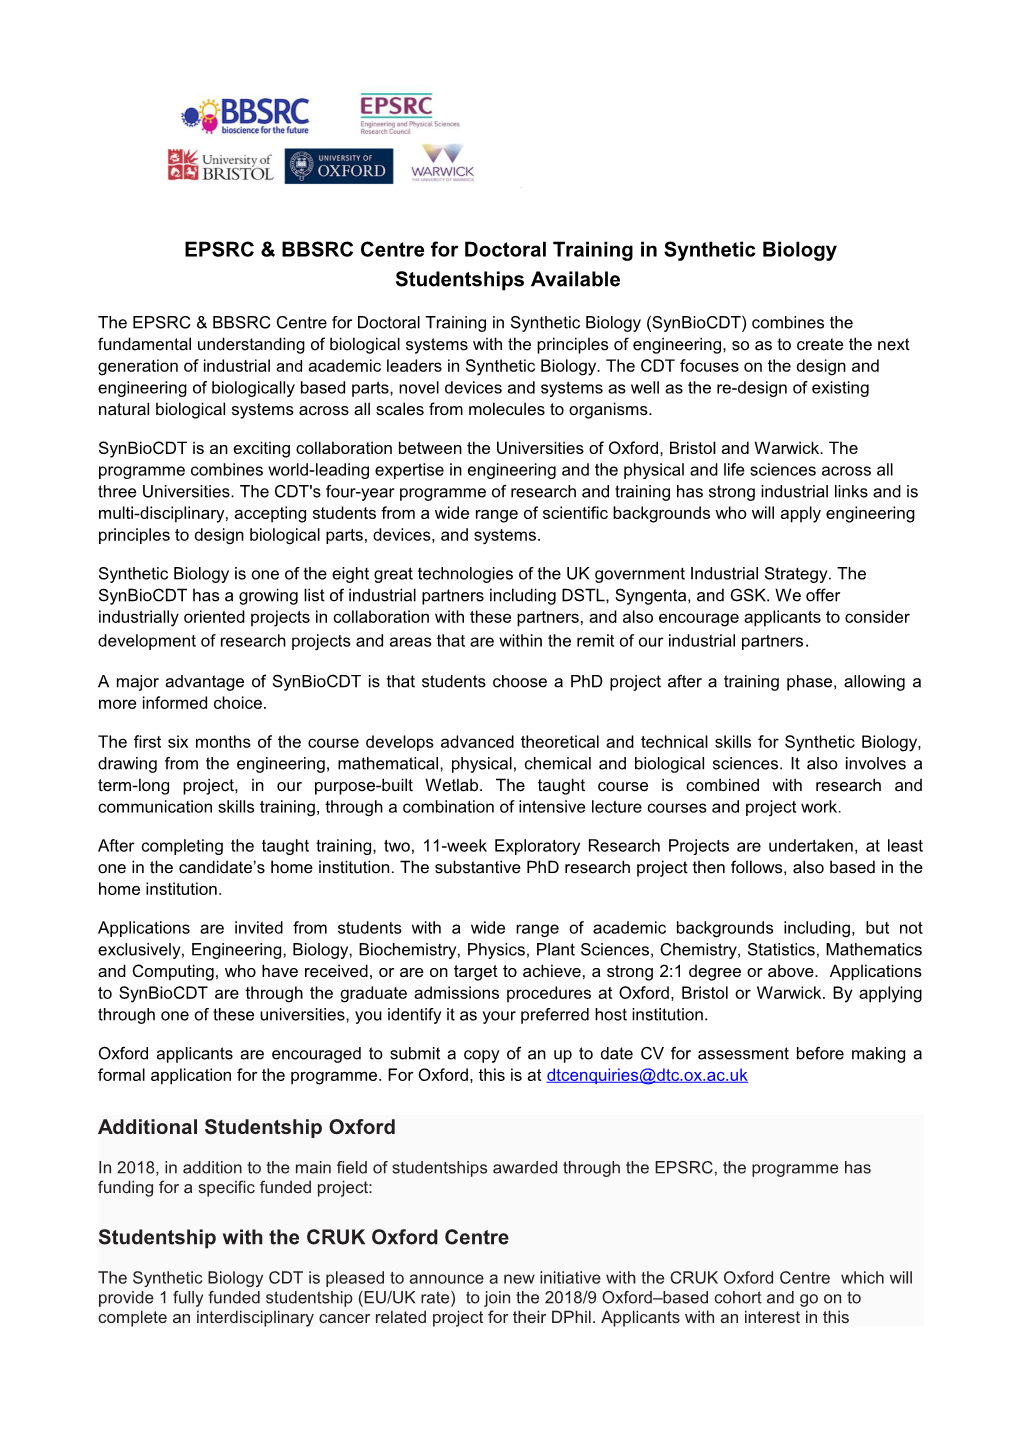 EPSRC & BBSRC Centre for Doctoral Training in Synthetic Biology